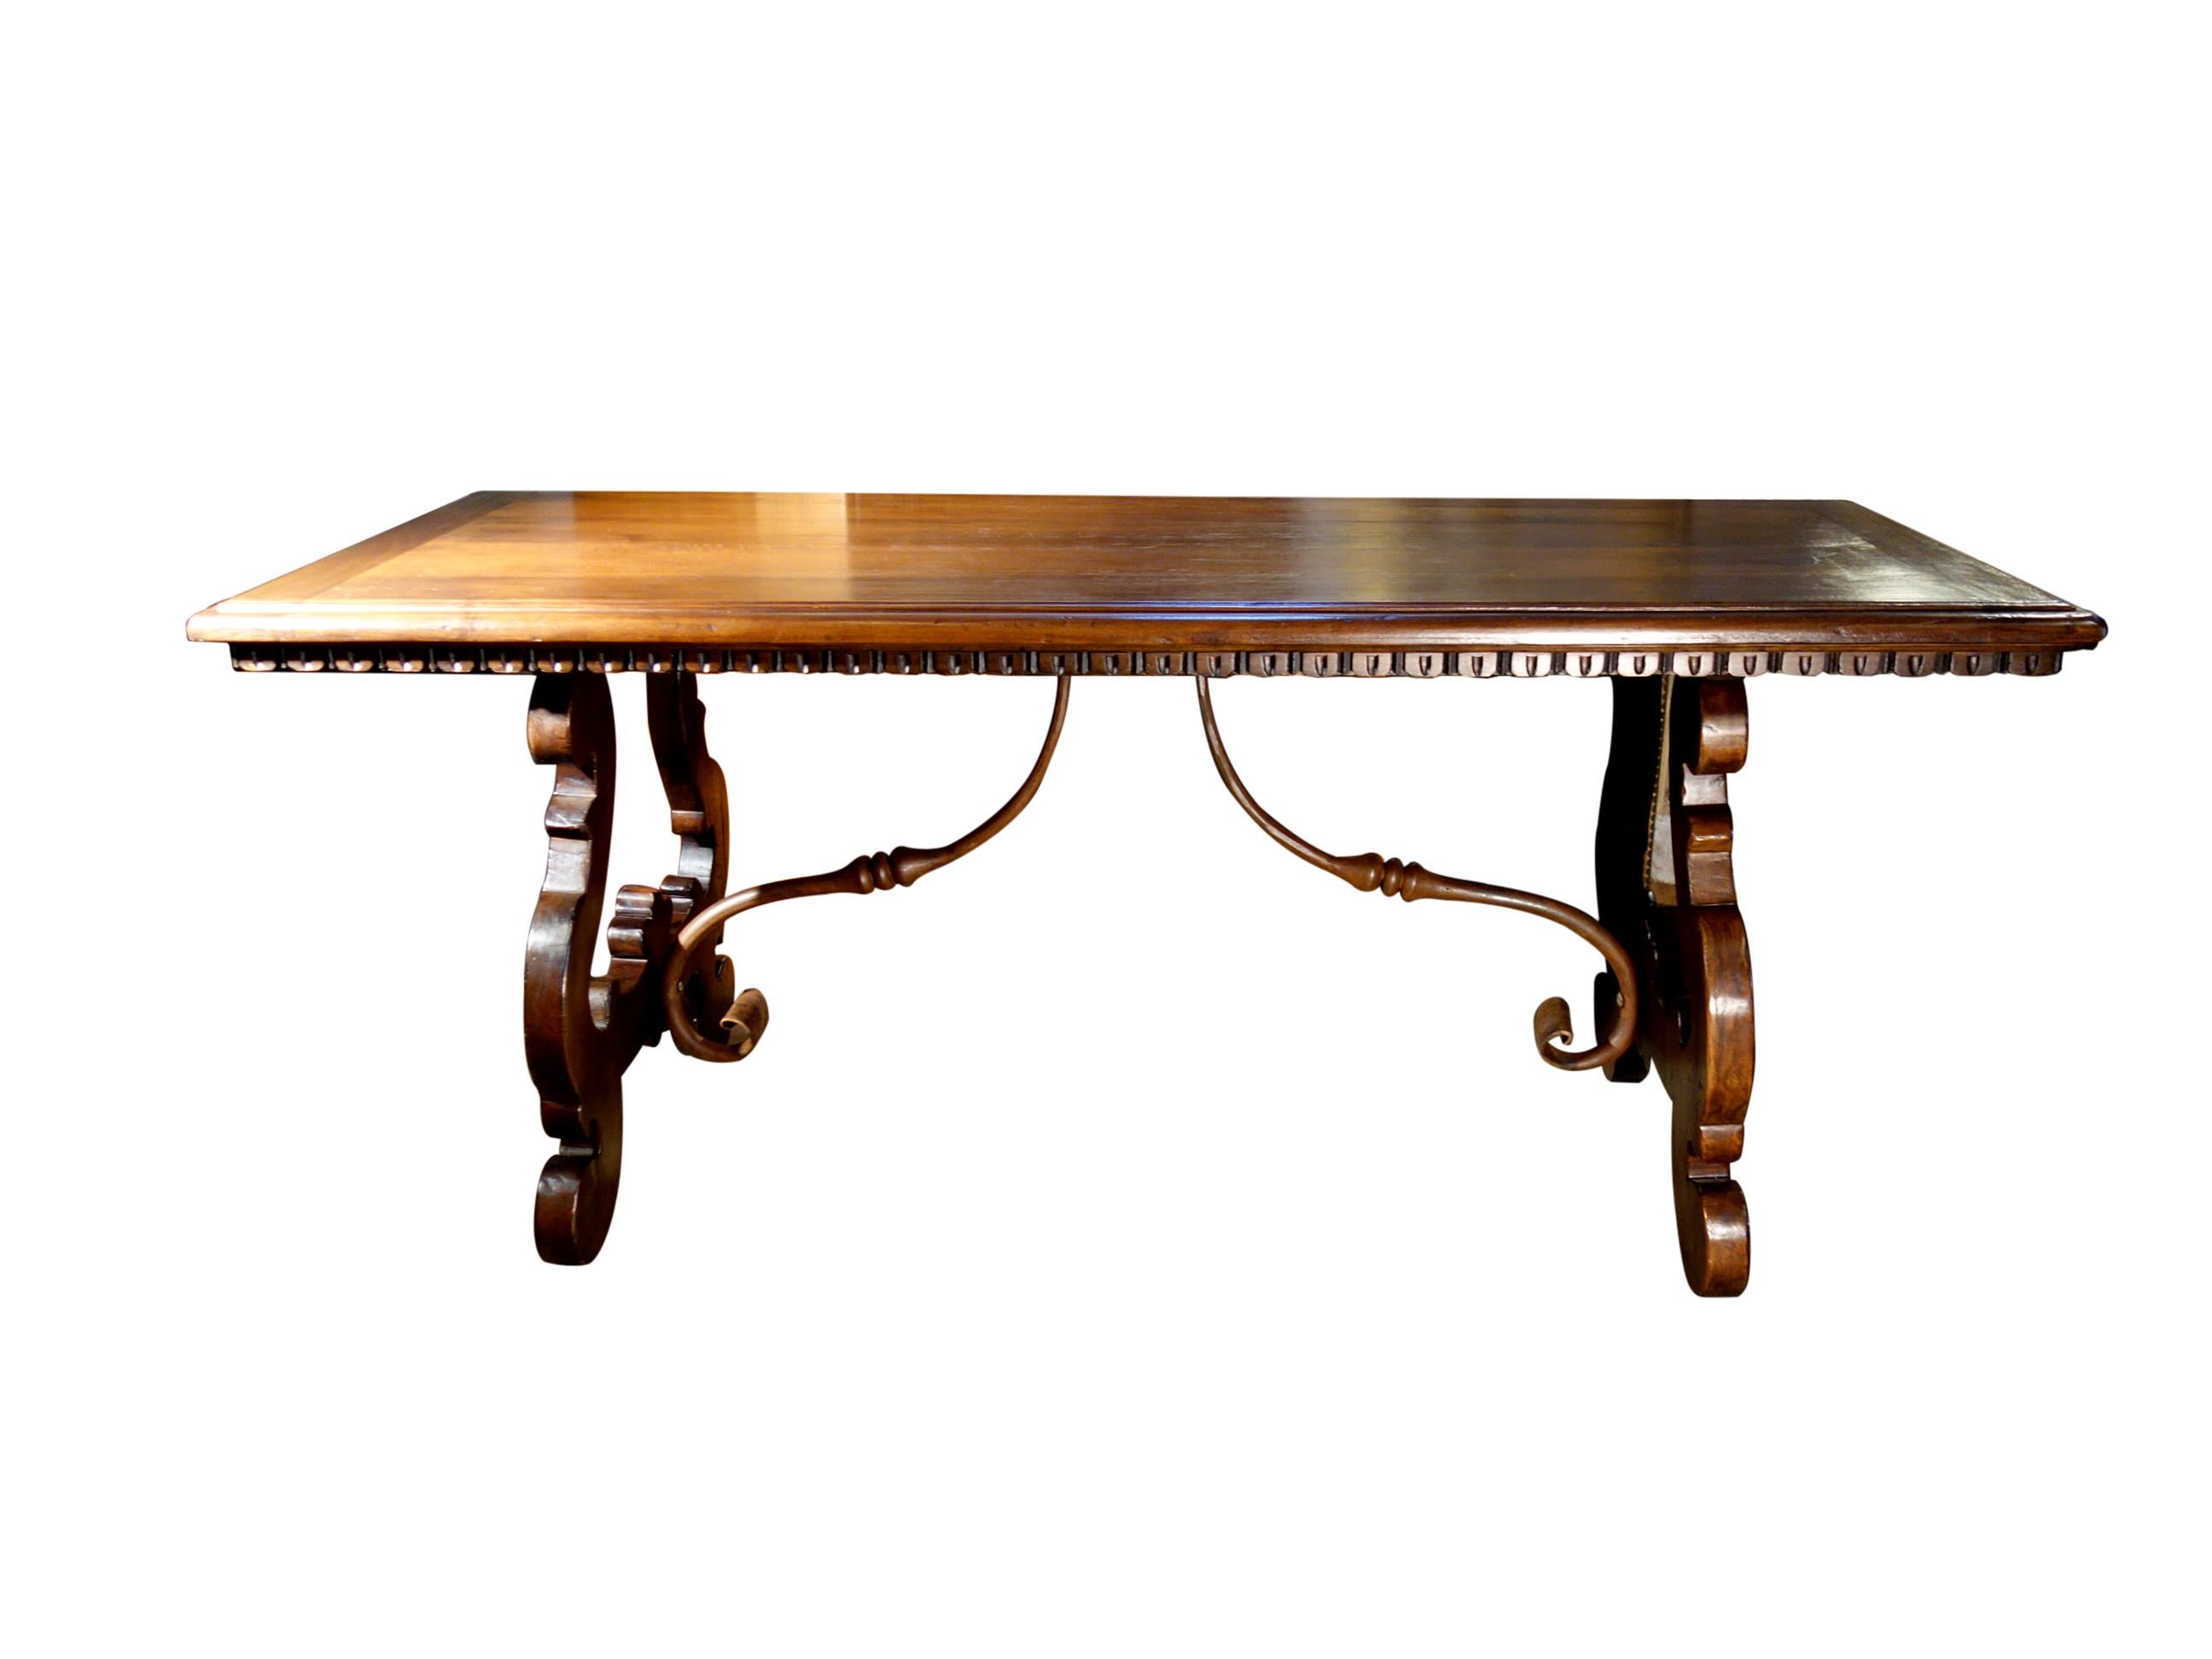 Old Walnut LIRA Scrivania writing table handcrafted in aged solid Italian walnut with a carved dentil edge under the top surface, lyre-shaped bases, and hand forged iron cross stretchers. Our latest 17th Century refectory style antique reproduction